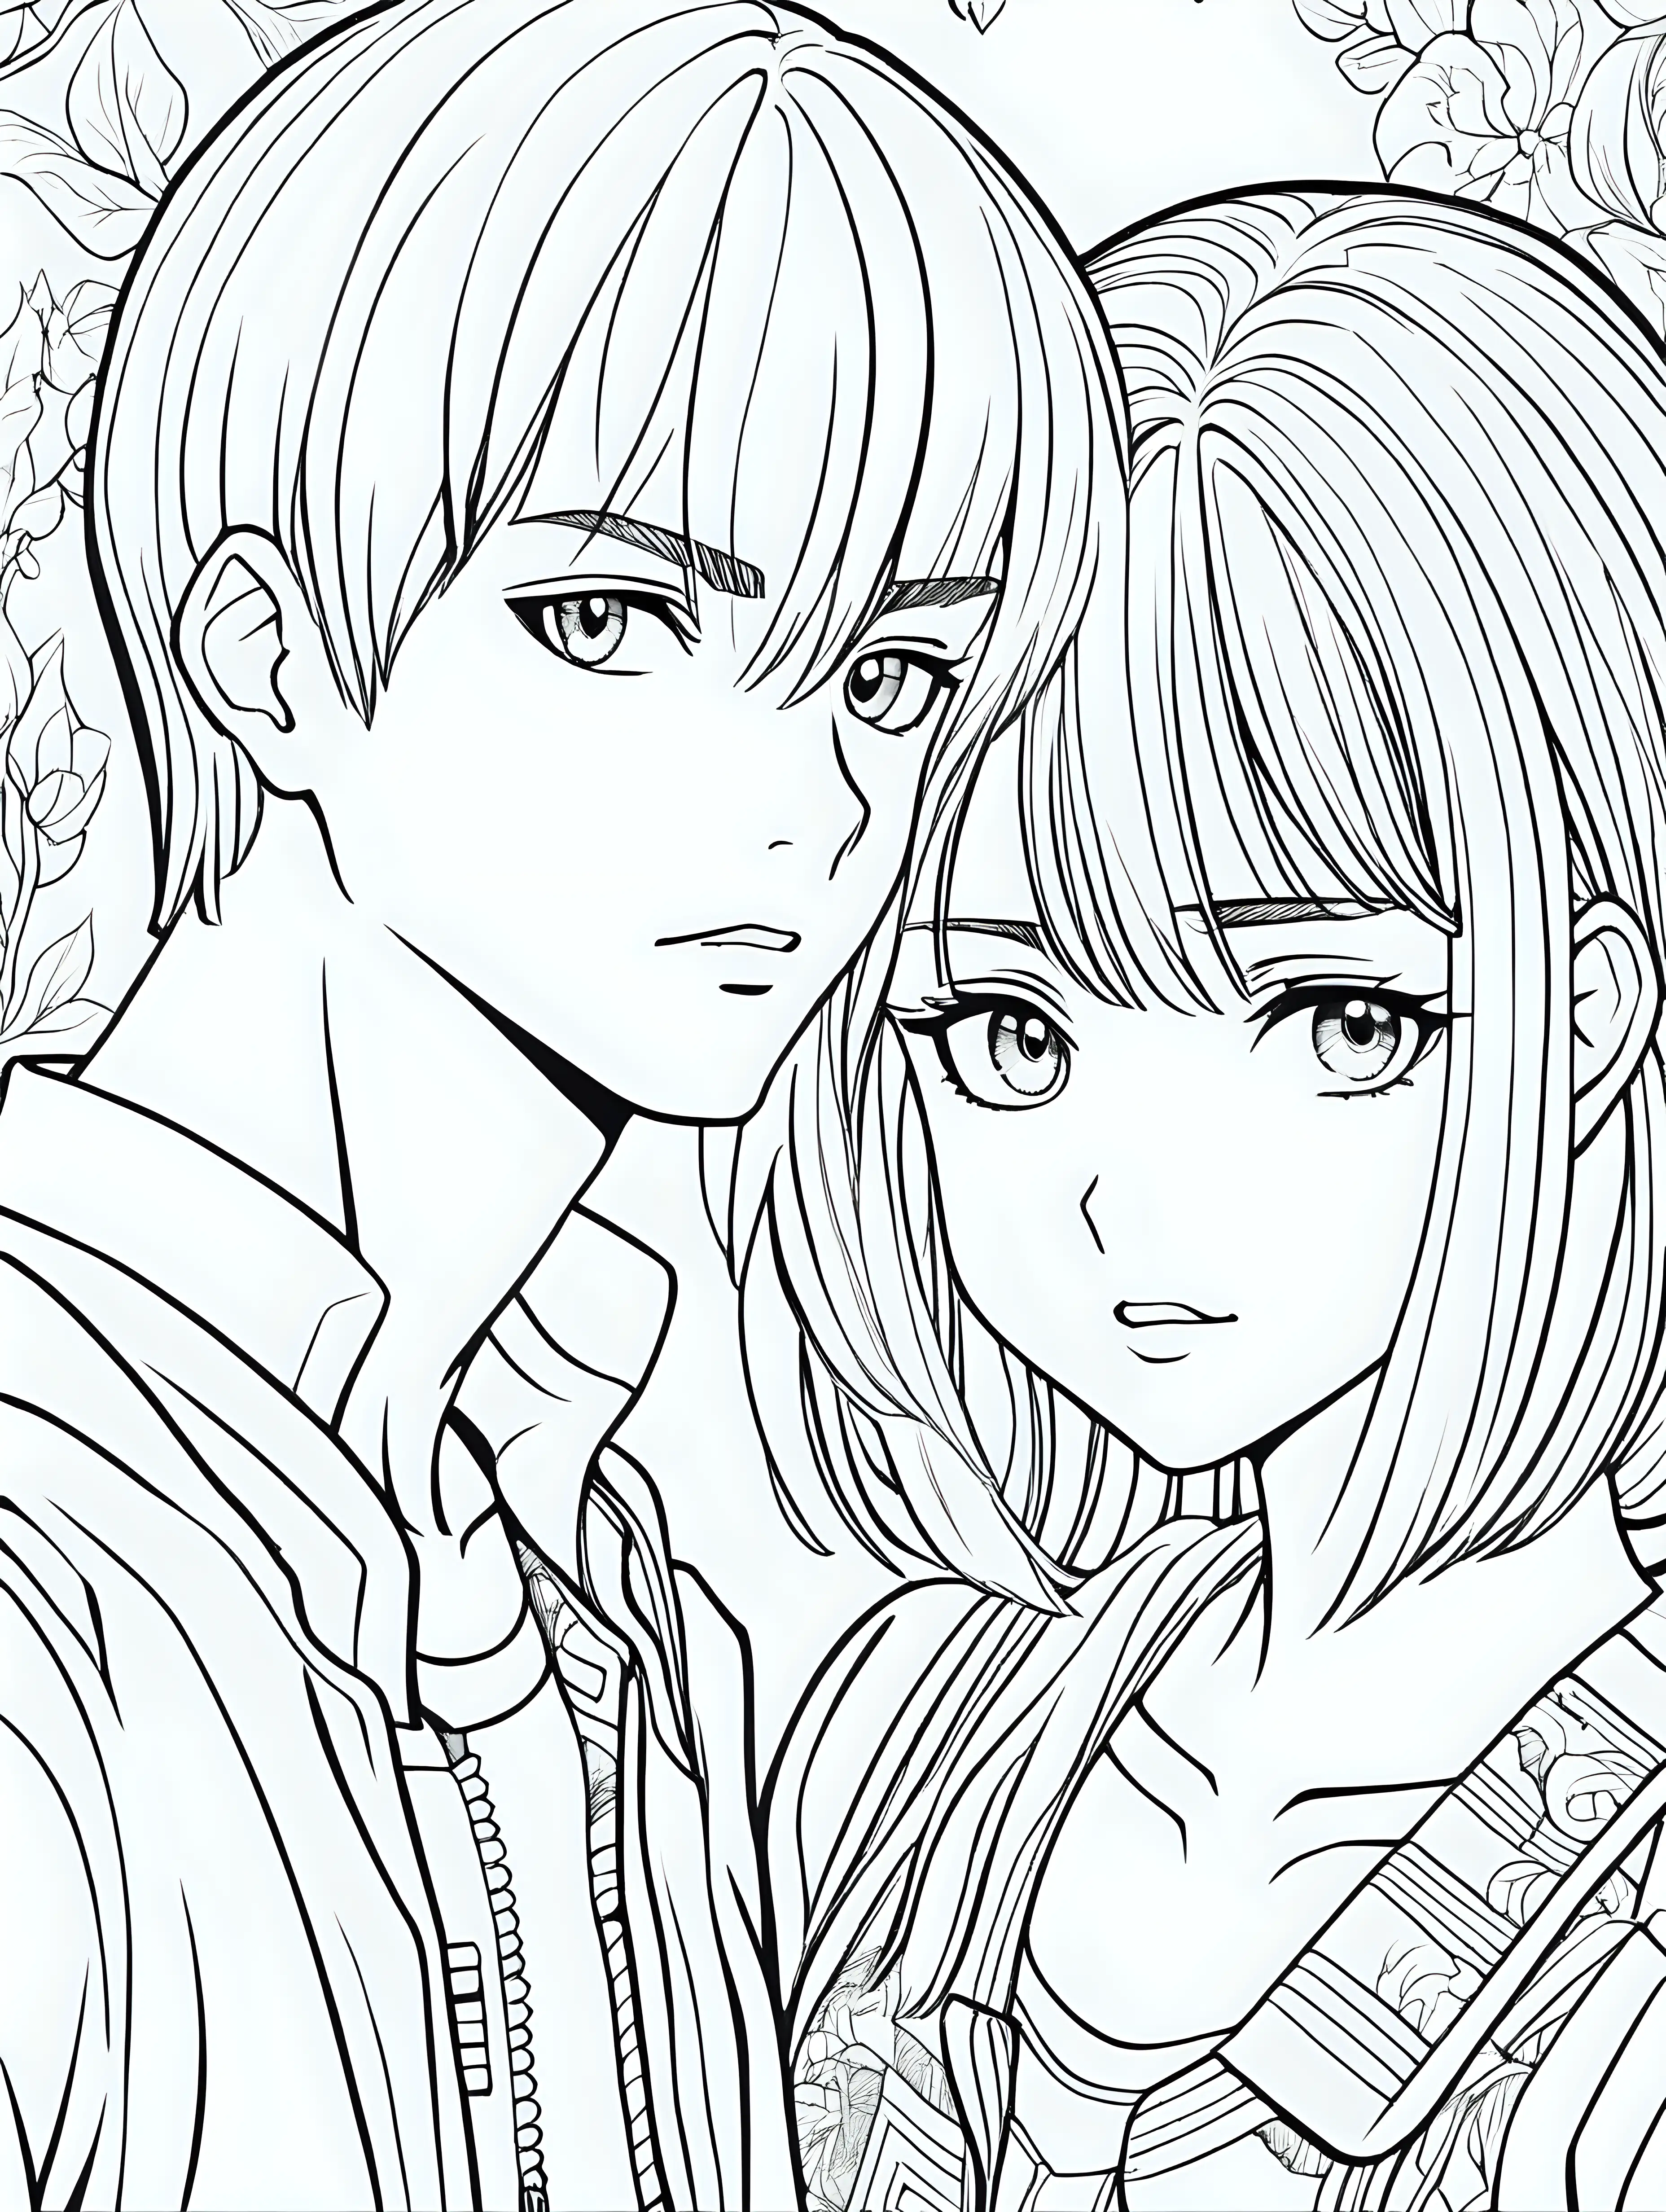 Manga Style Adult Coloring Book Page Featuring Two Youthful Characters